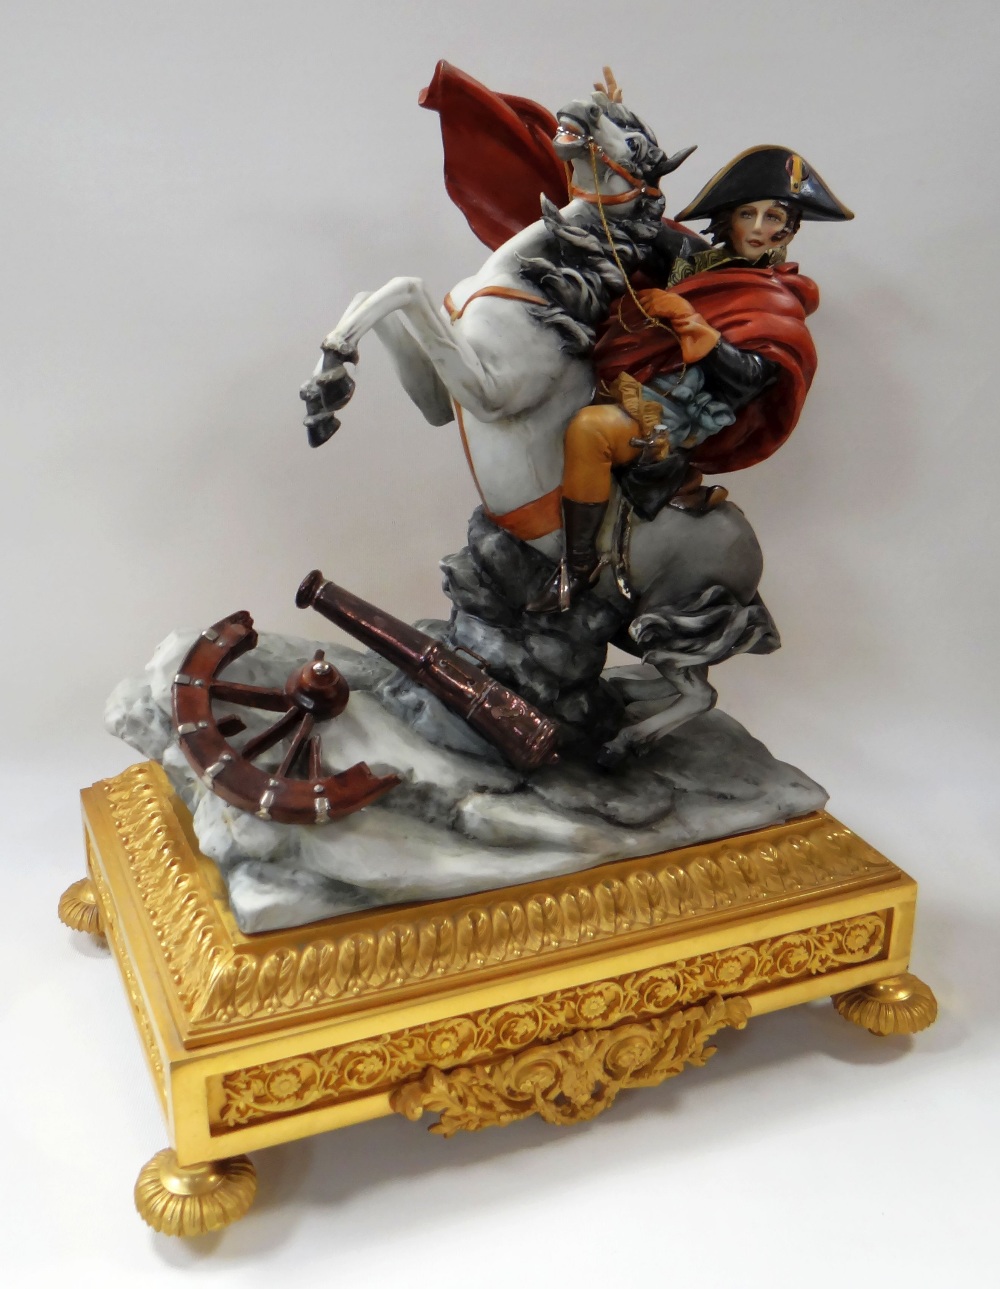 A CAPODIMONTE SCULPTURE 'NAPOLEON CROSSING THE ALPS' composed of the figure riding a bucking horse